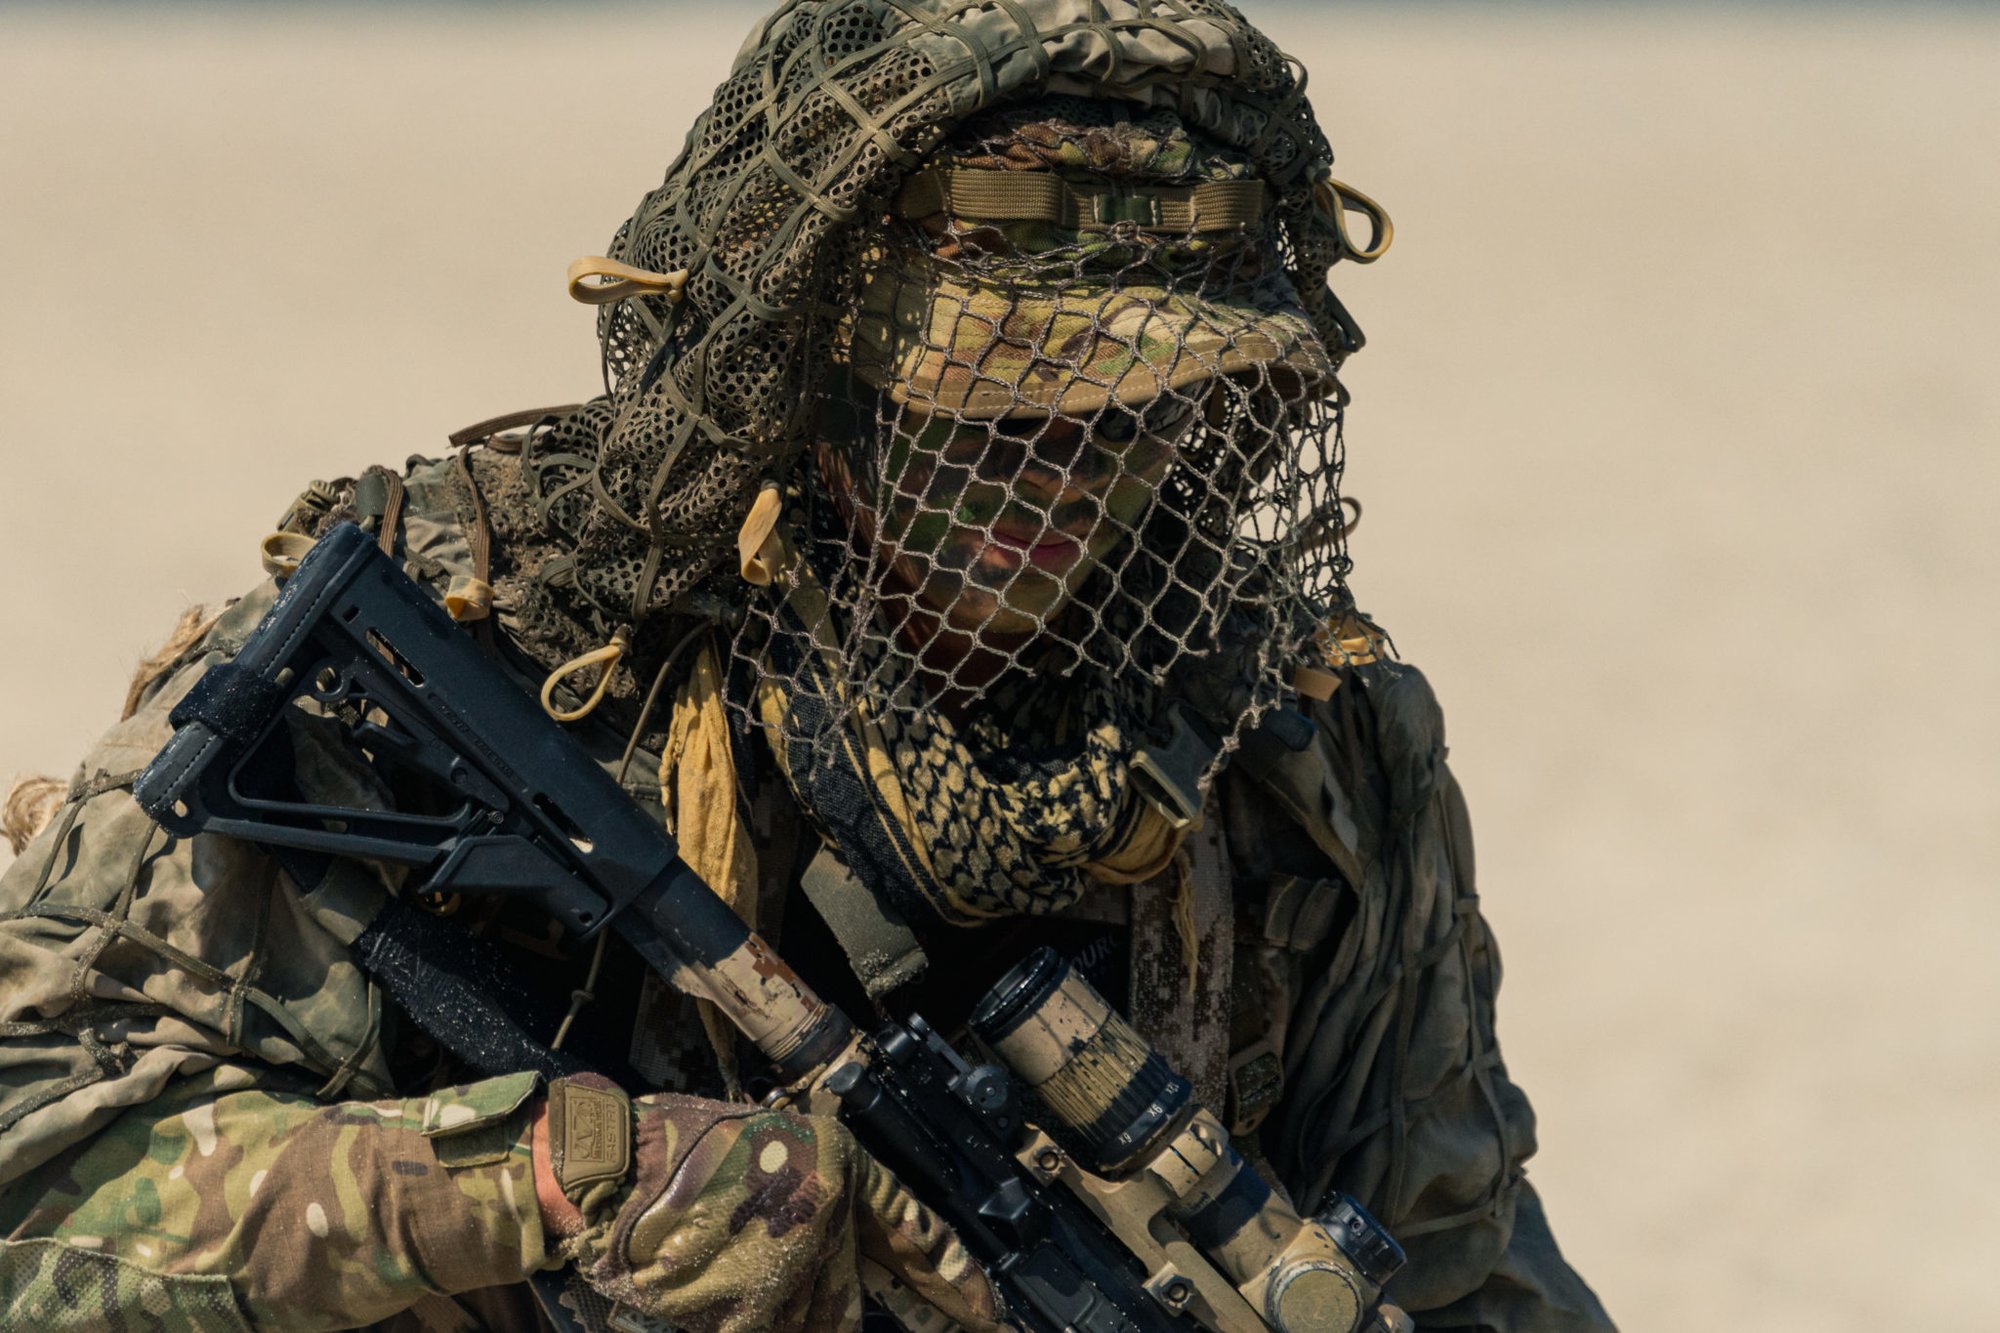 A Navy SEAL from Naval Special Warfare Group 2 moves from his beach side hide site during a capabilities exercise. Photo by Marty Skovlund, Jr./Coffee or Die.